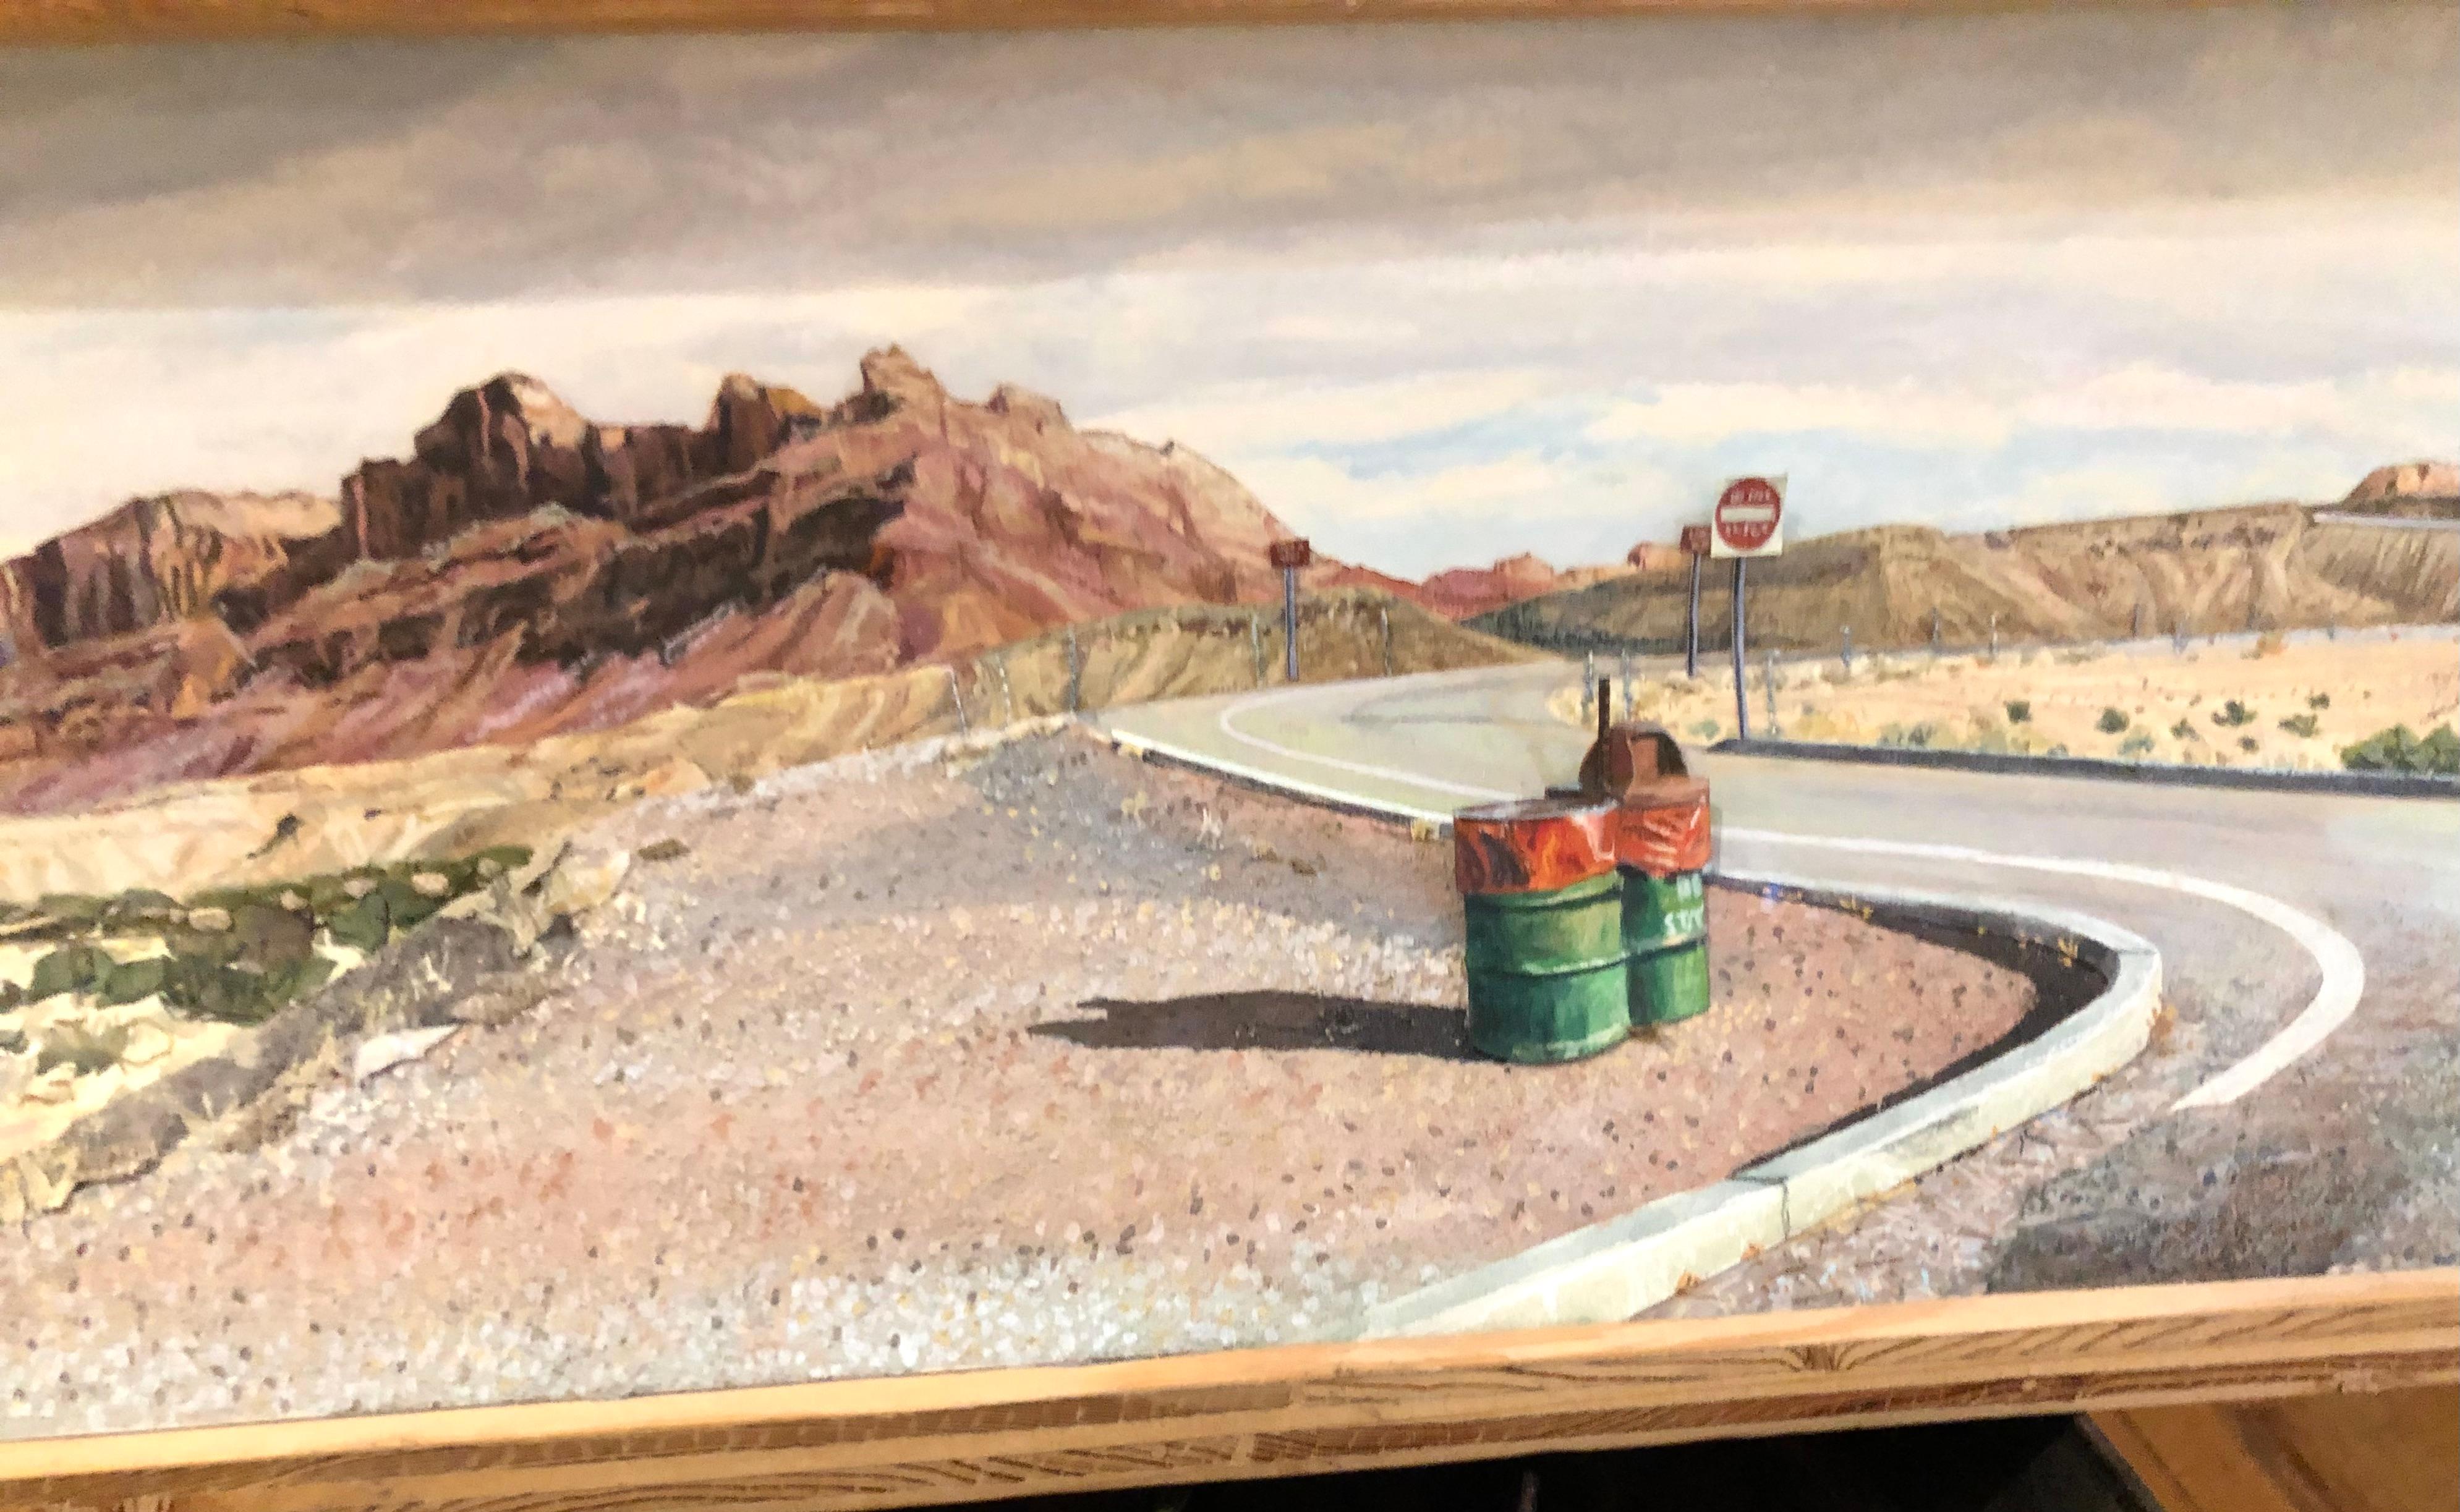 Stunning diorama by American artist Lloyd Brown. “View of Area Above San Rafael Reef, Utah” 1999. Signed and dated with gallery tags. I
Lloyd Brown has been fascinated with the viewer’s experience of panorama, particularly as it seems to negate the